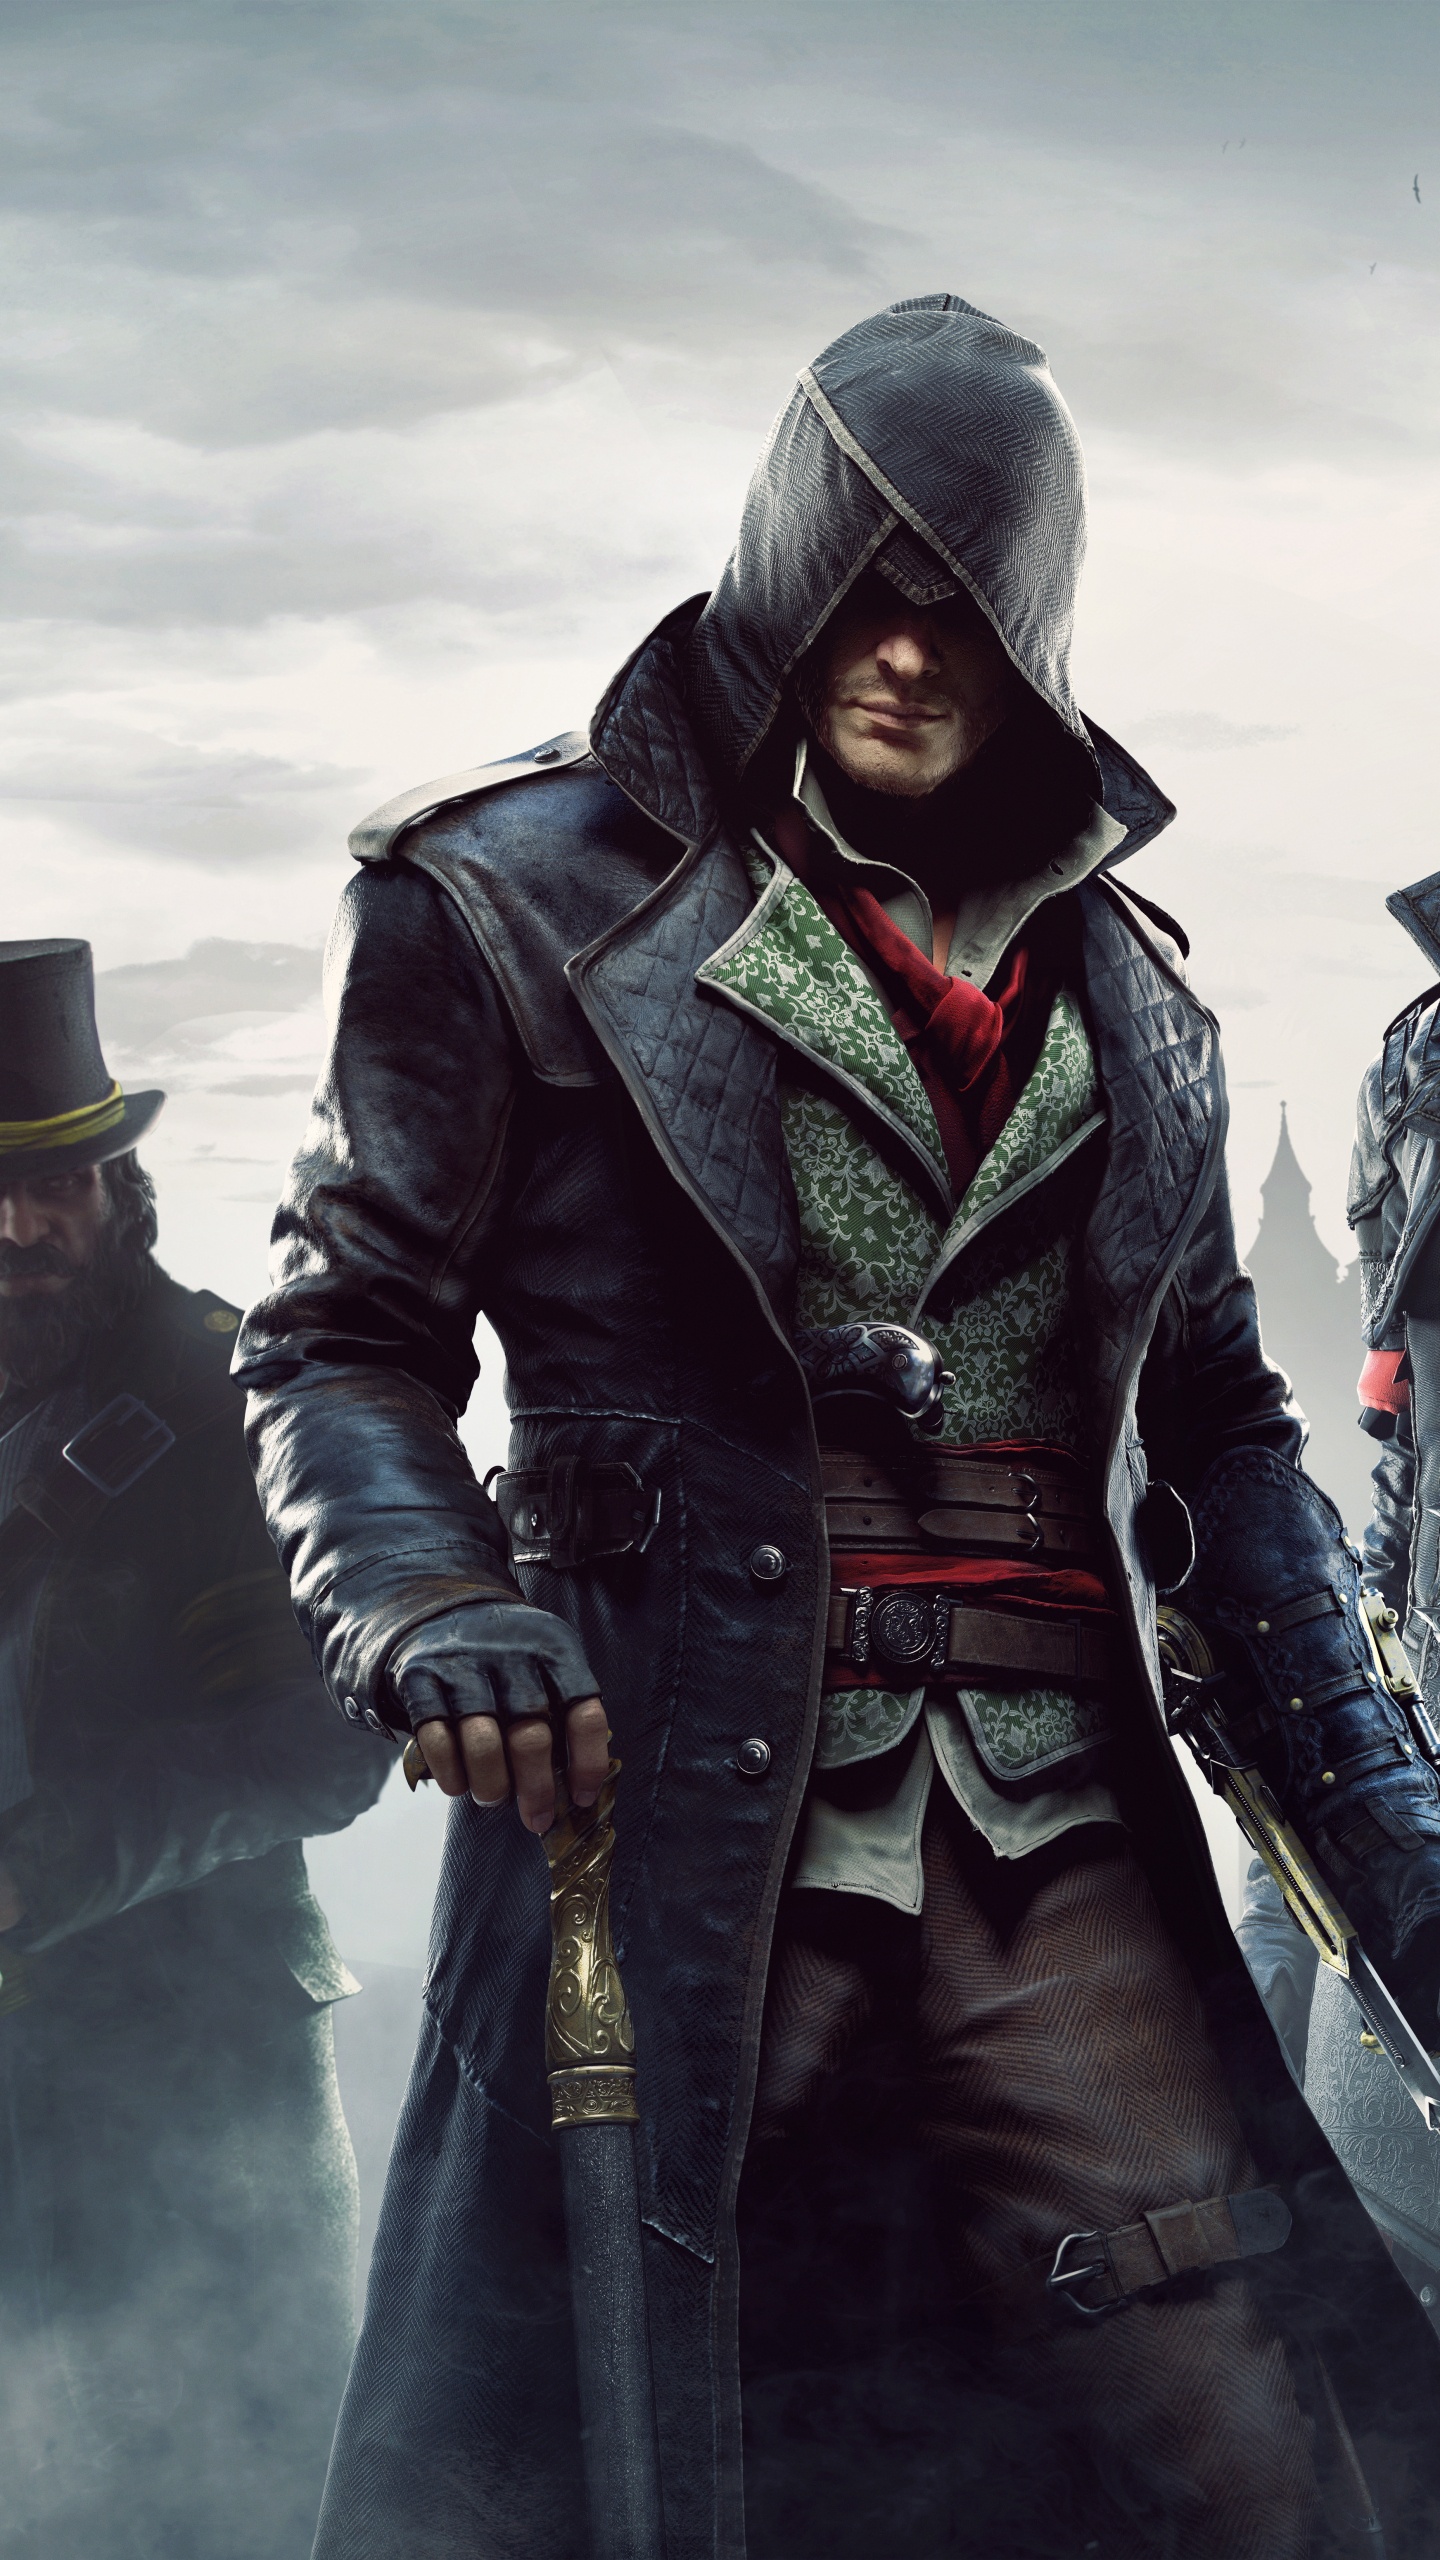 Assassins Creed Syndicate, Ubisoft, Pc-Spiel, Film, Assassins Creed Unity. Wallpaper in 1440x2560 Resolution